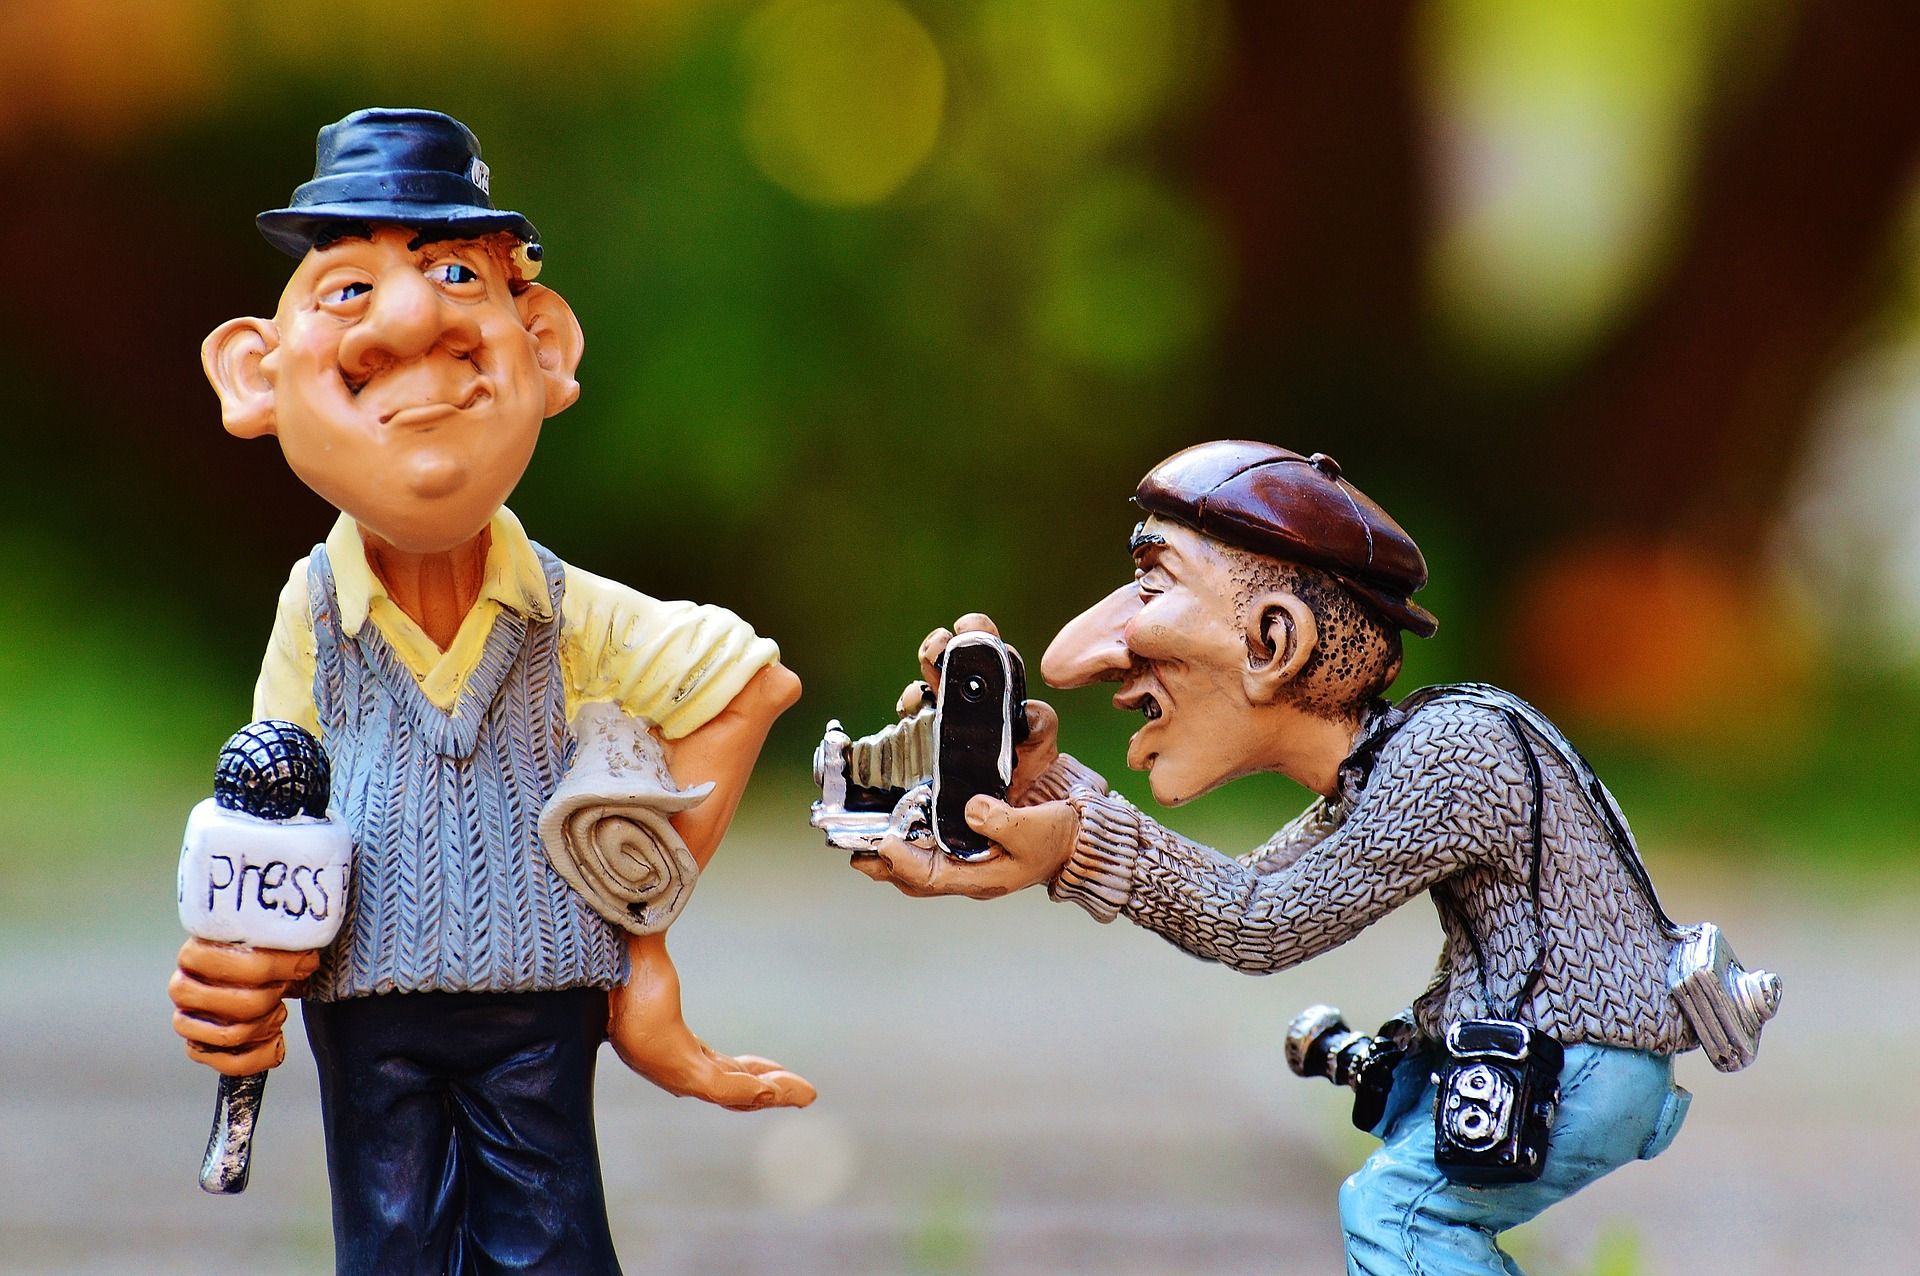 Press And Journalist Figurines HD Wallpaper. Background Image